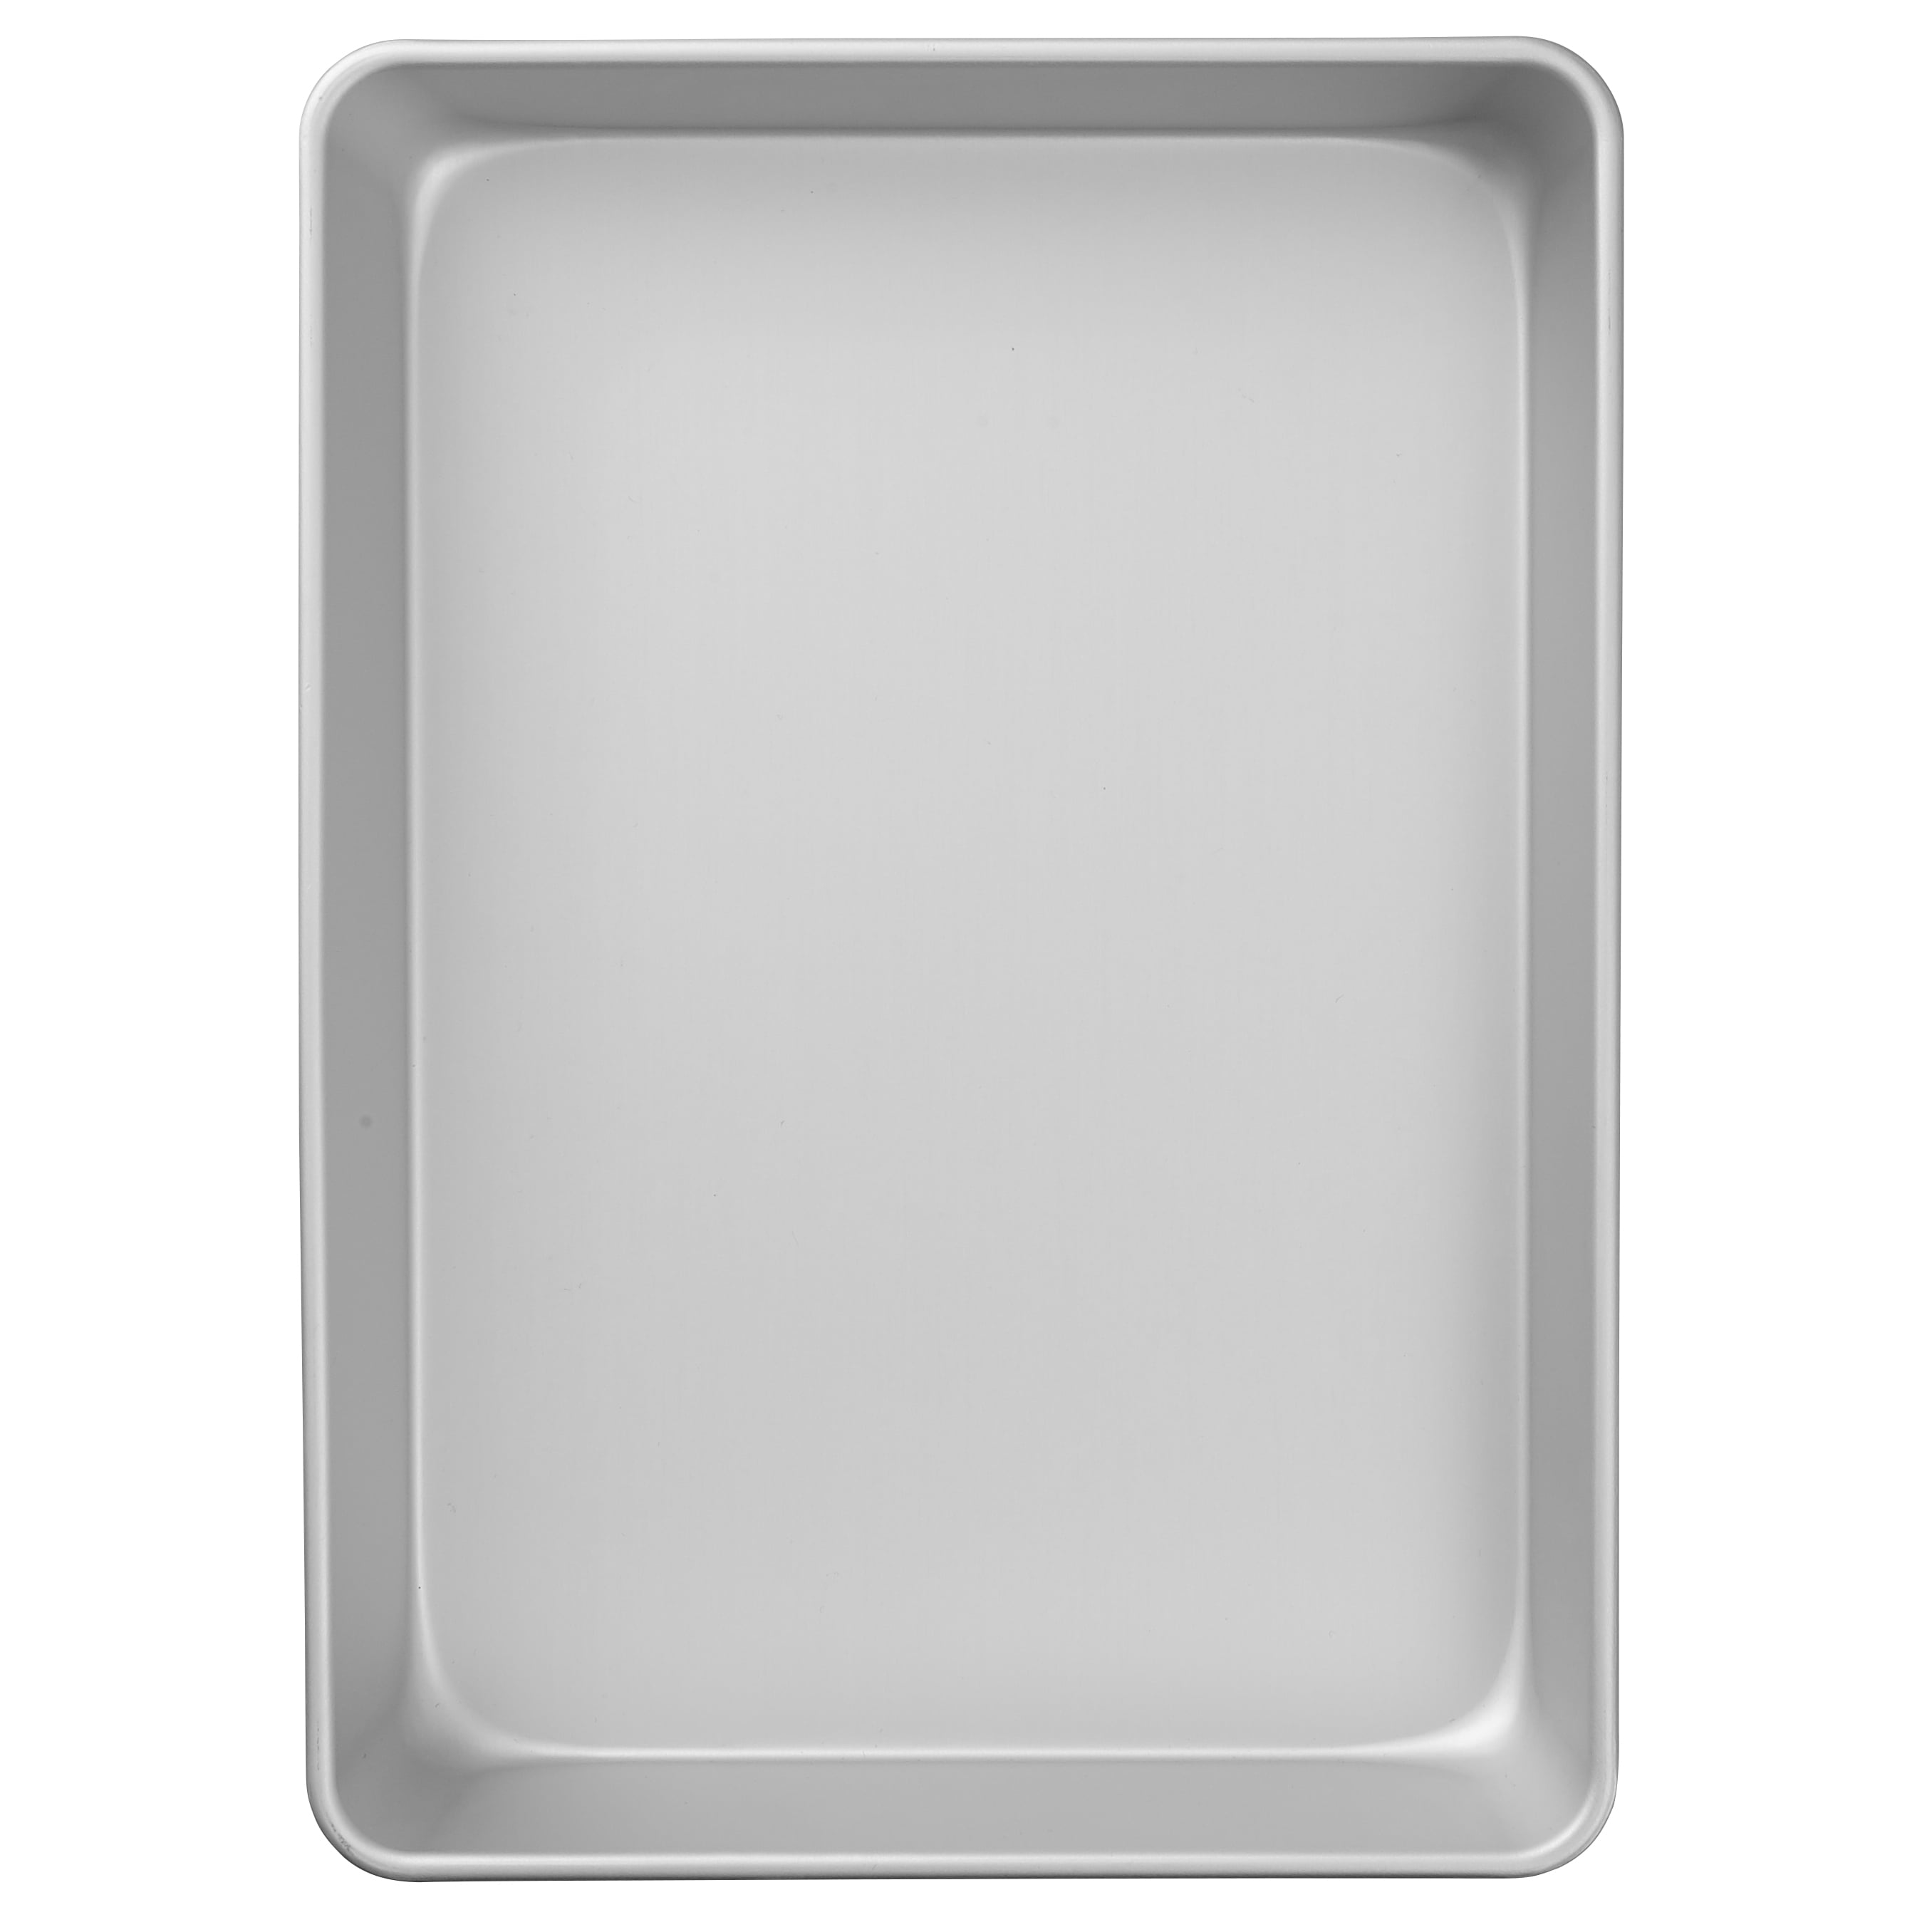 Allrecipes Sheet Cake Pan, 9 x 13 in - Fry's Food Stores